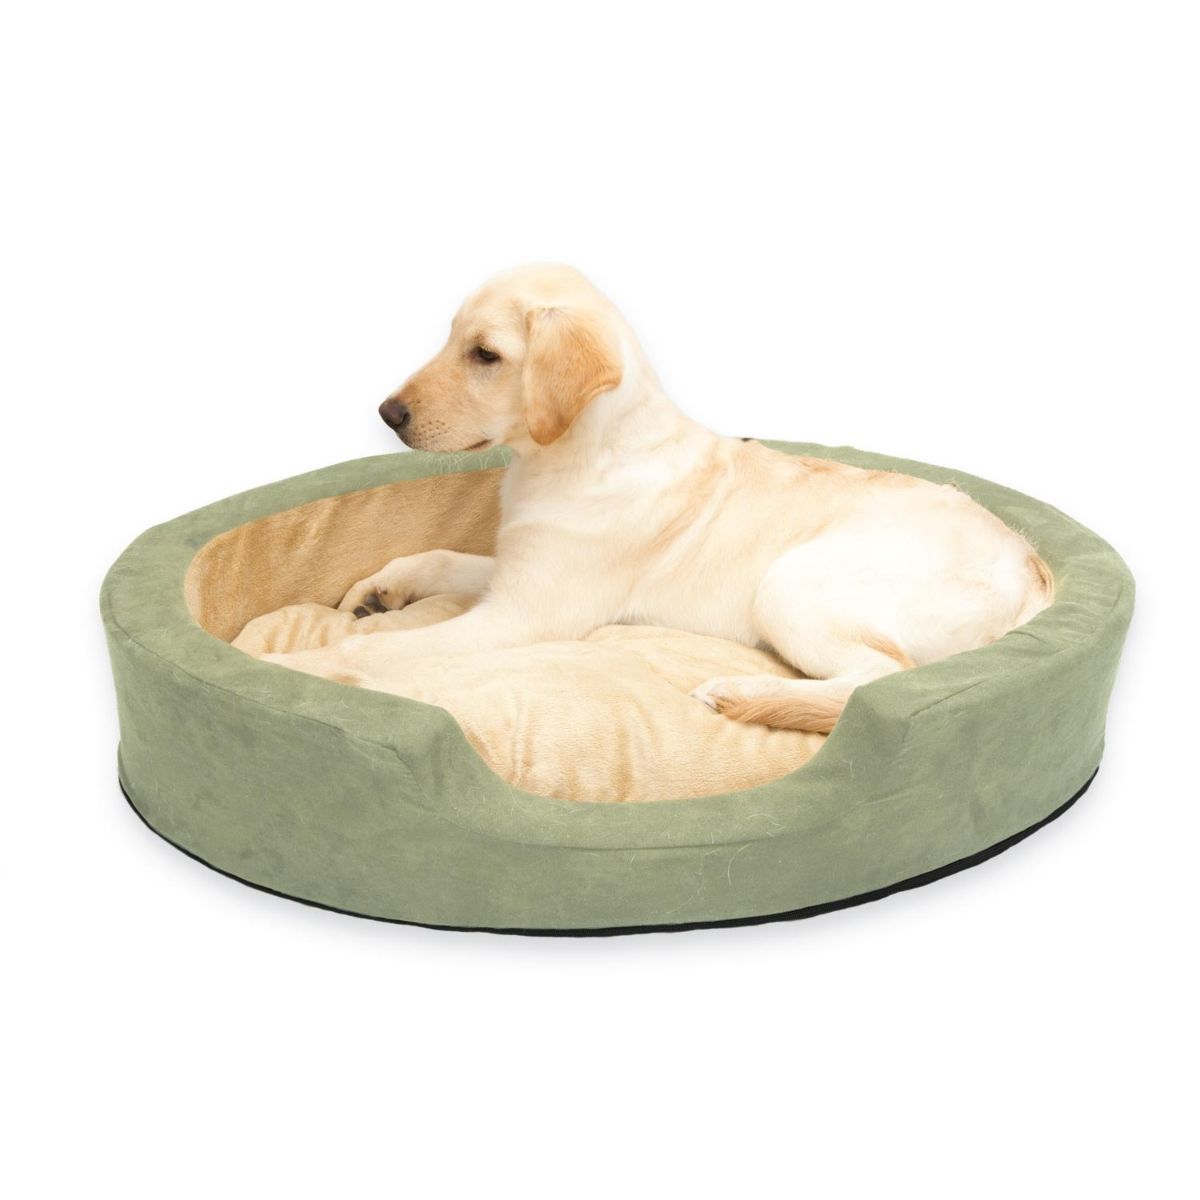 K&H Pet Products Thermo-Snuggly Sleeper Heated Pet Bed